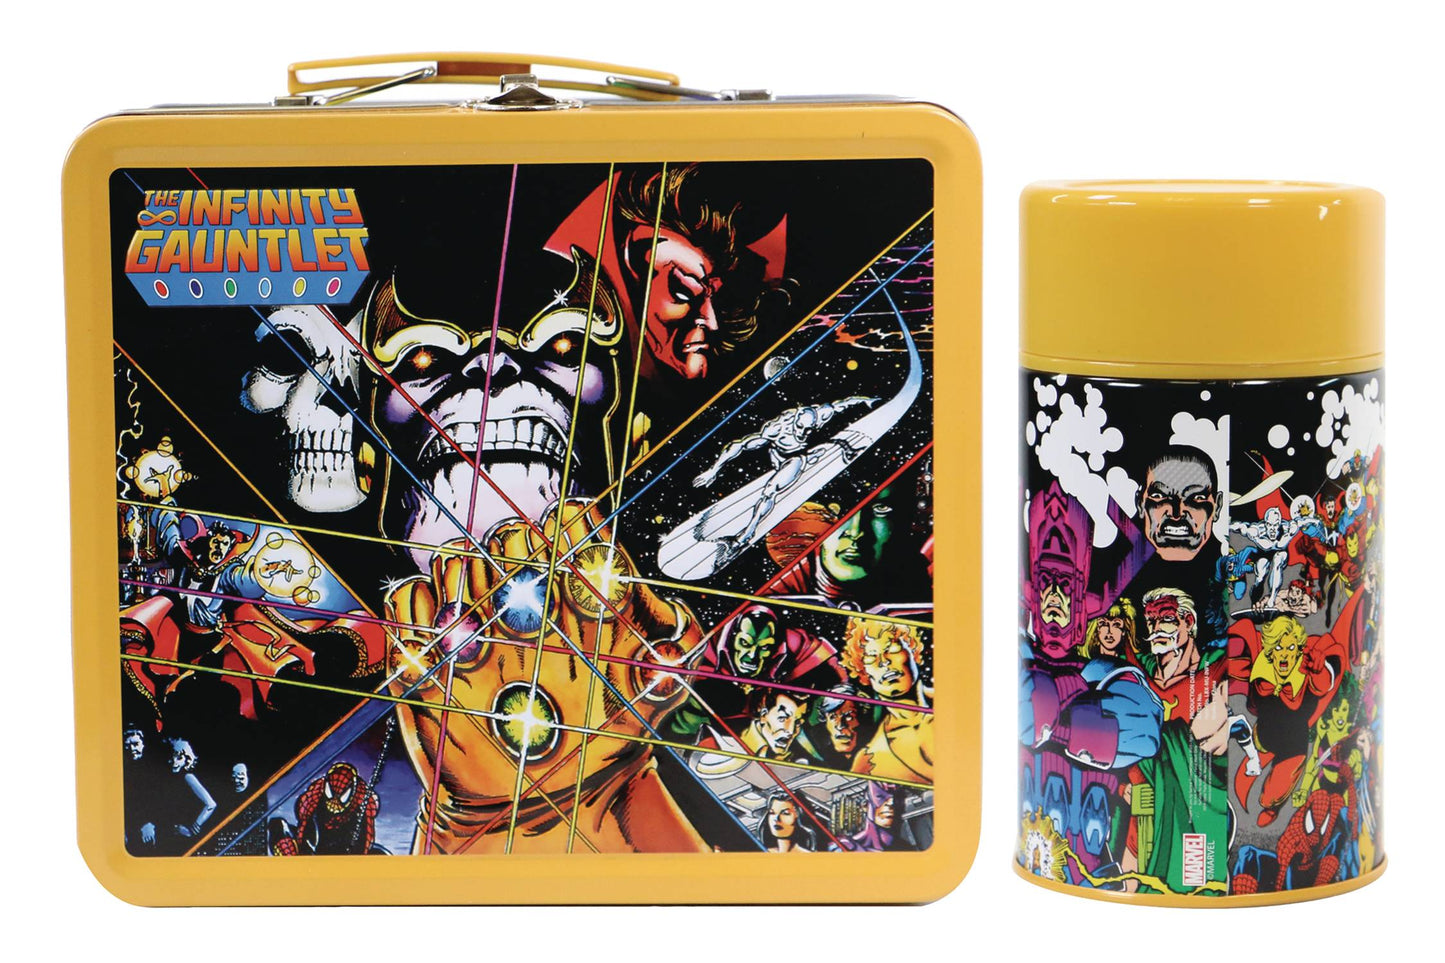 Tin Titans - The Infinity Gauntlet Lunch Box - Previews Exclusive